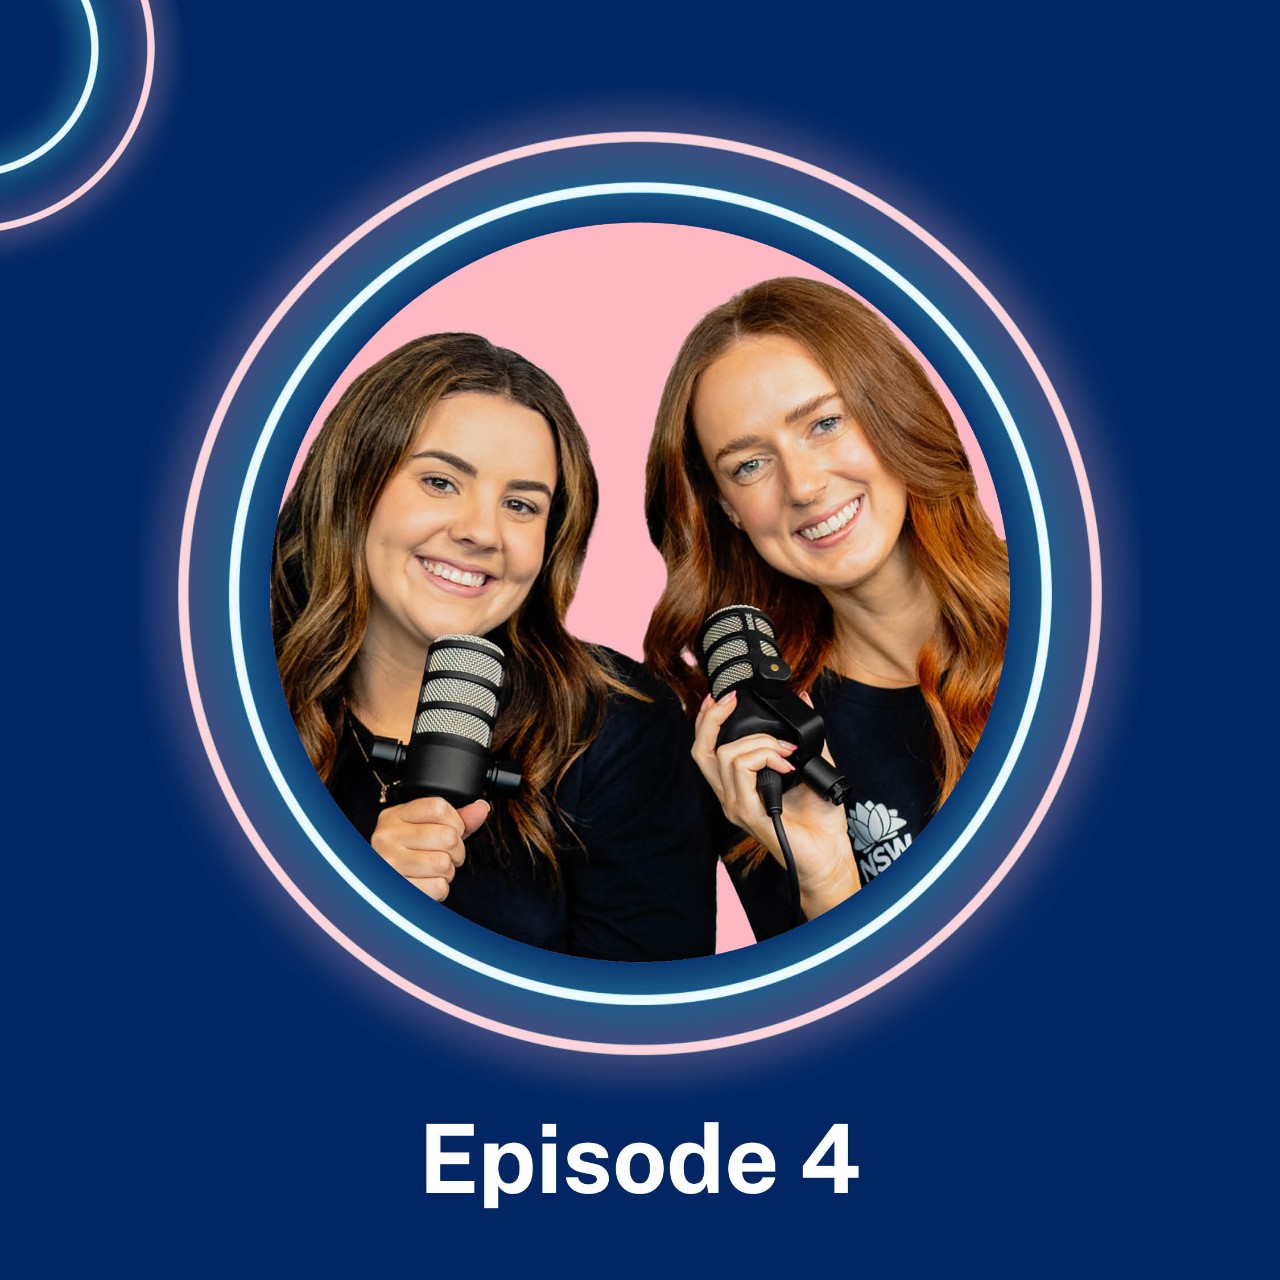 Profile picture of podcast hosts, Shannon and Siobhan